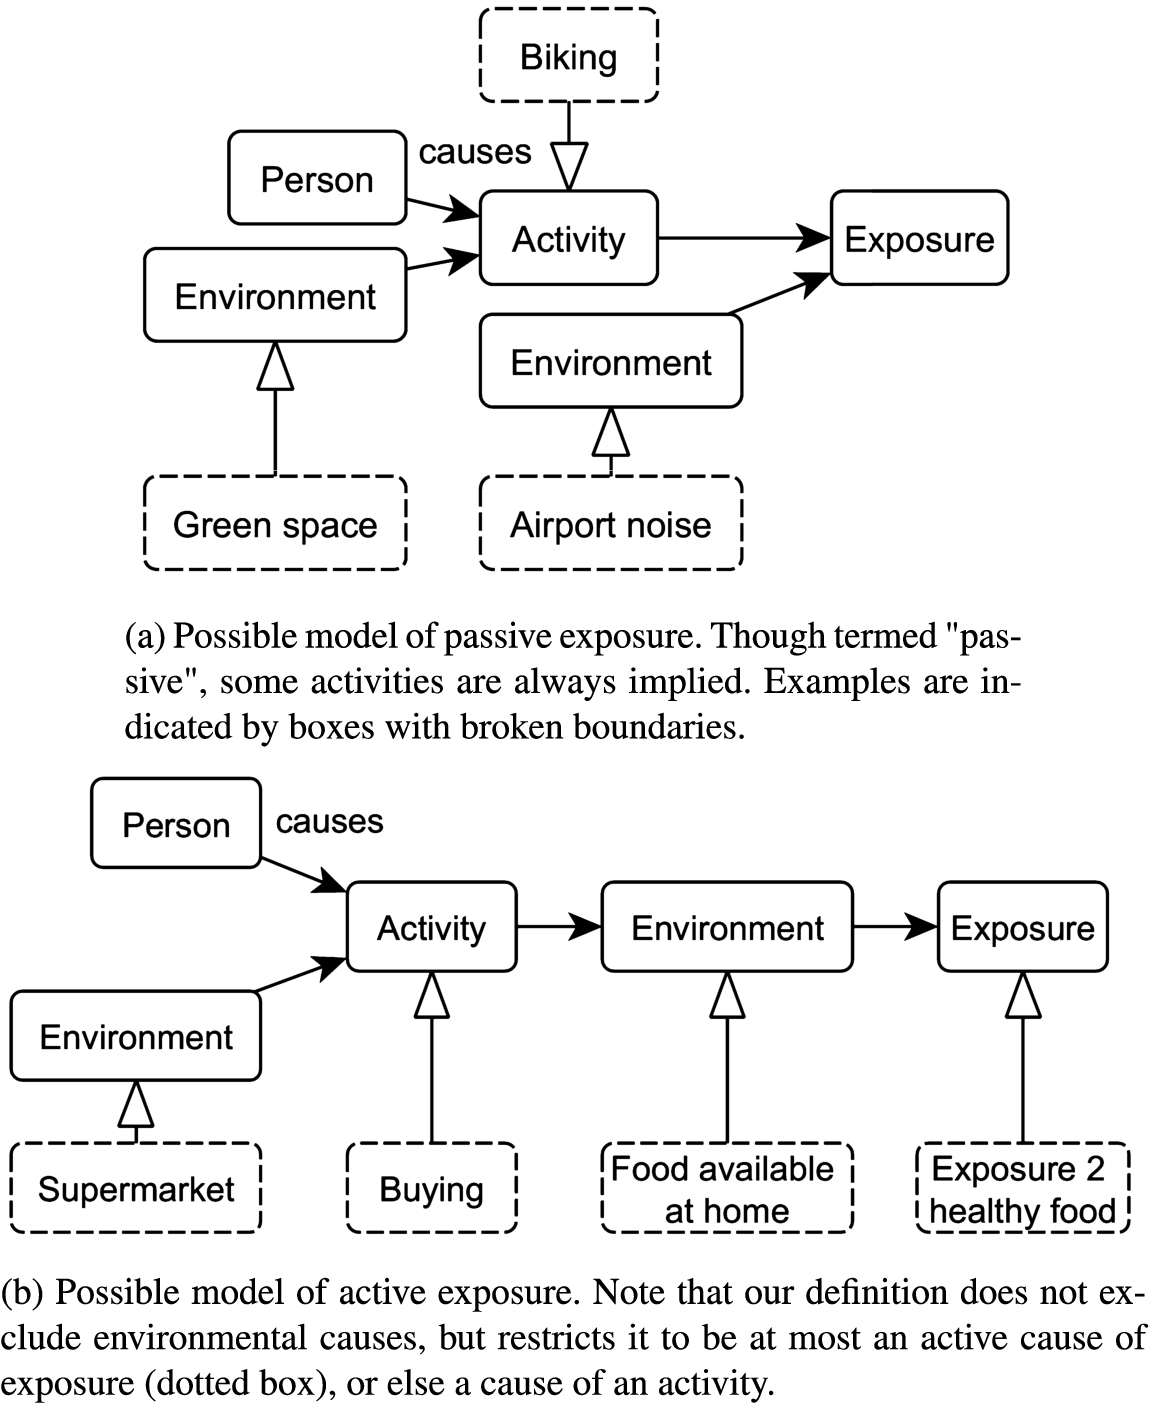 Possible models of active and passive exposure.